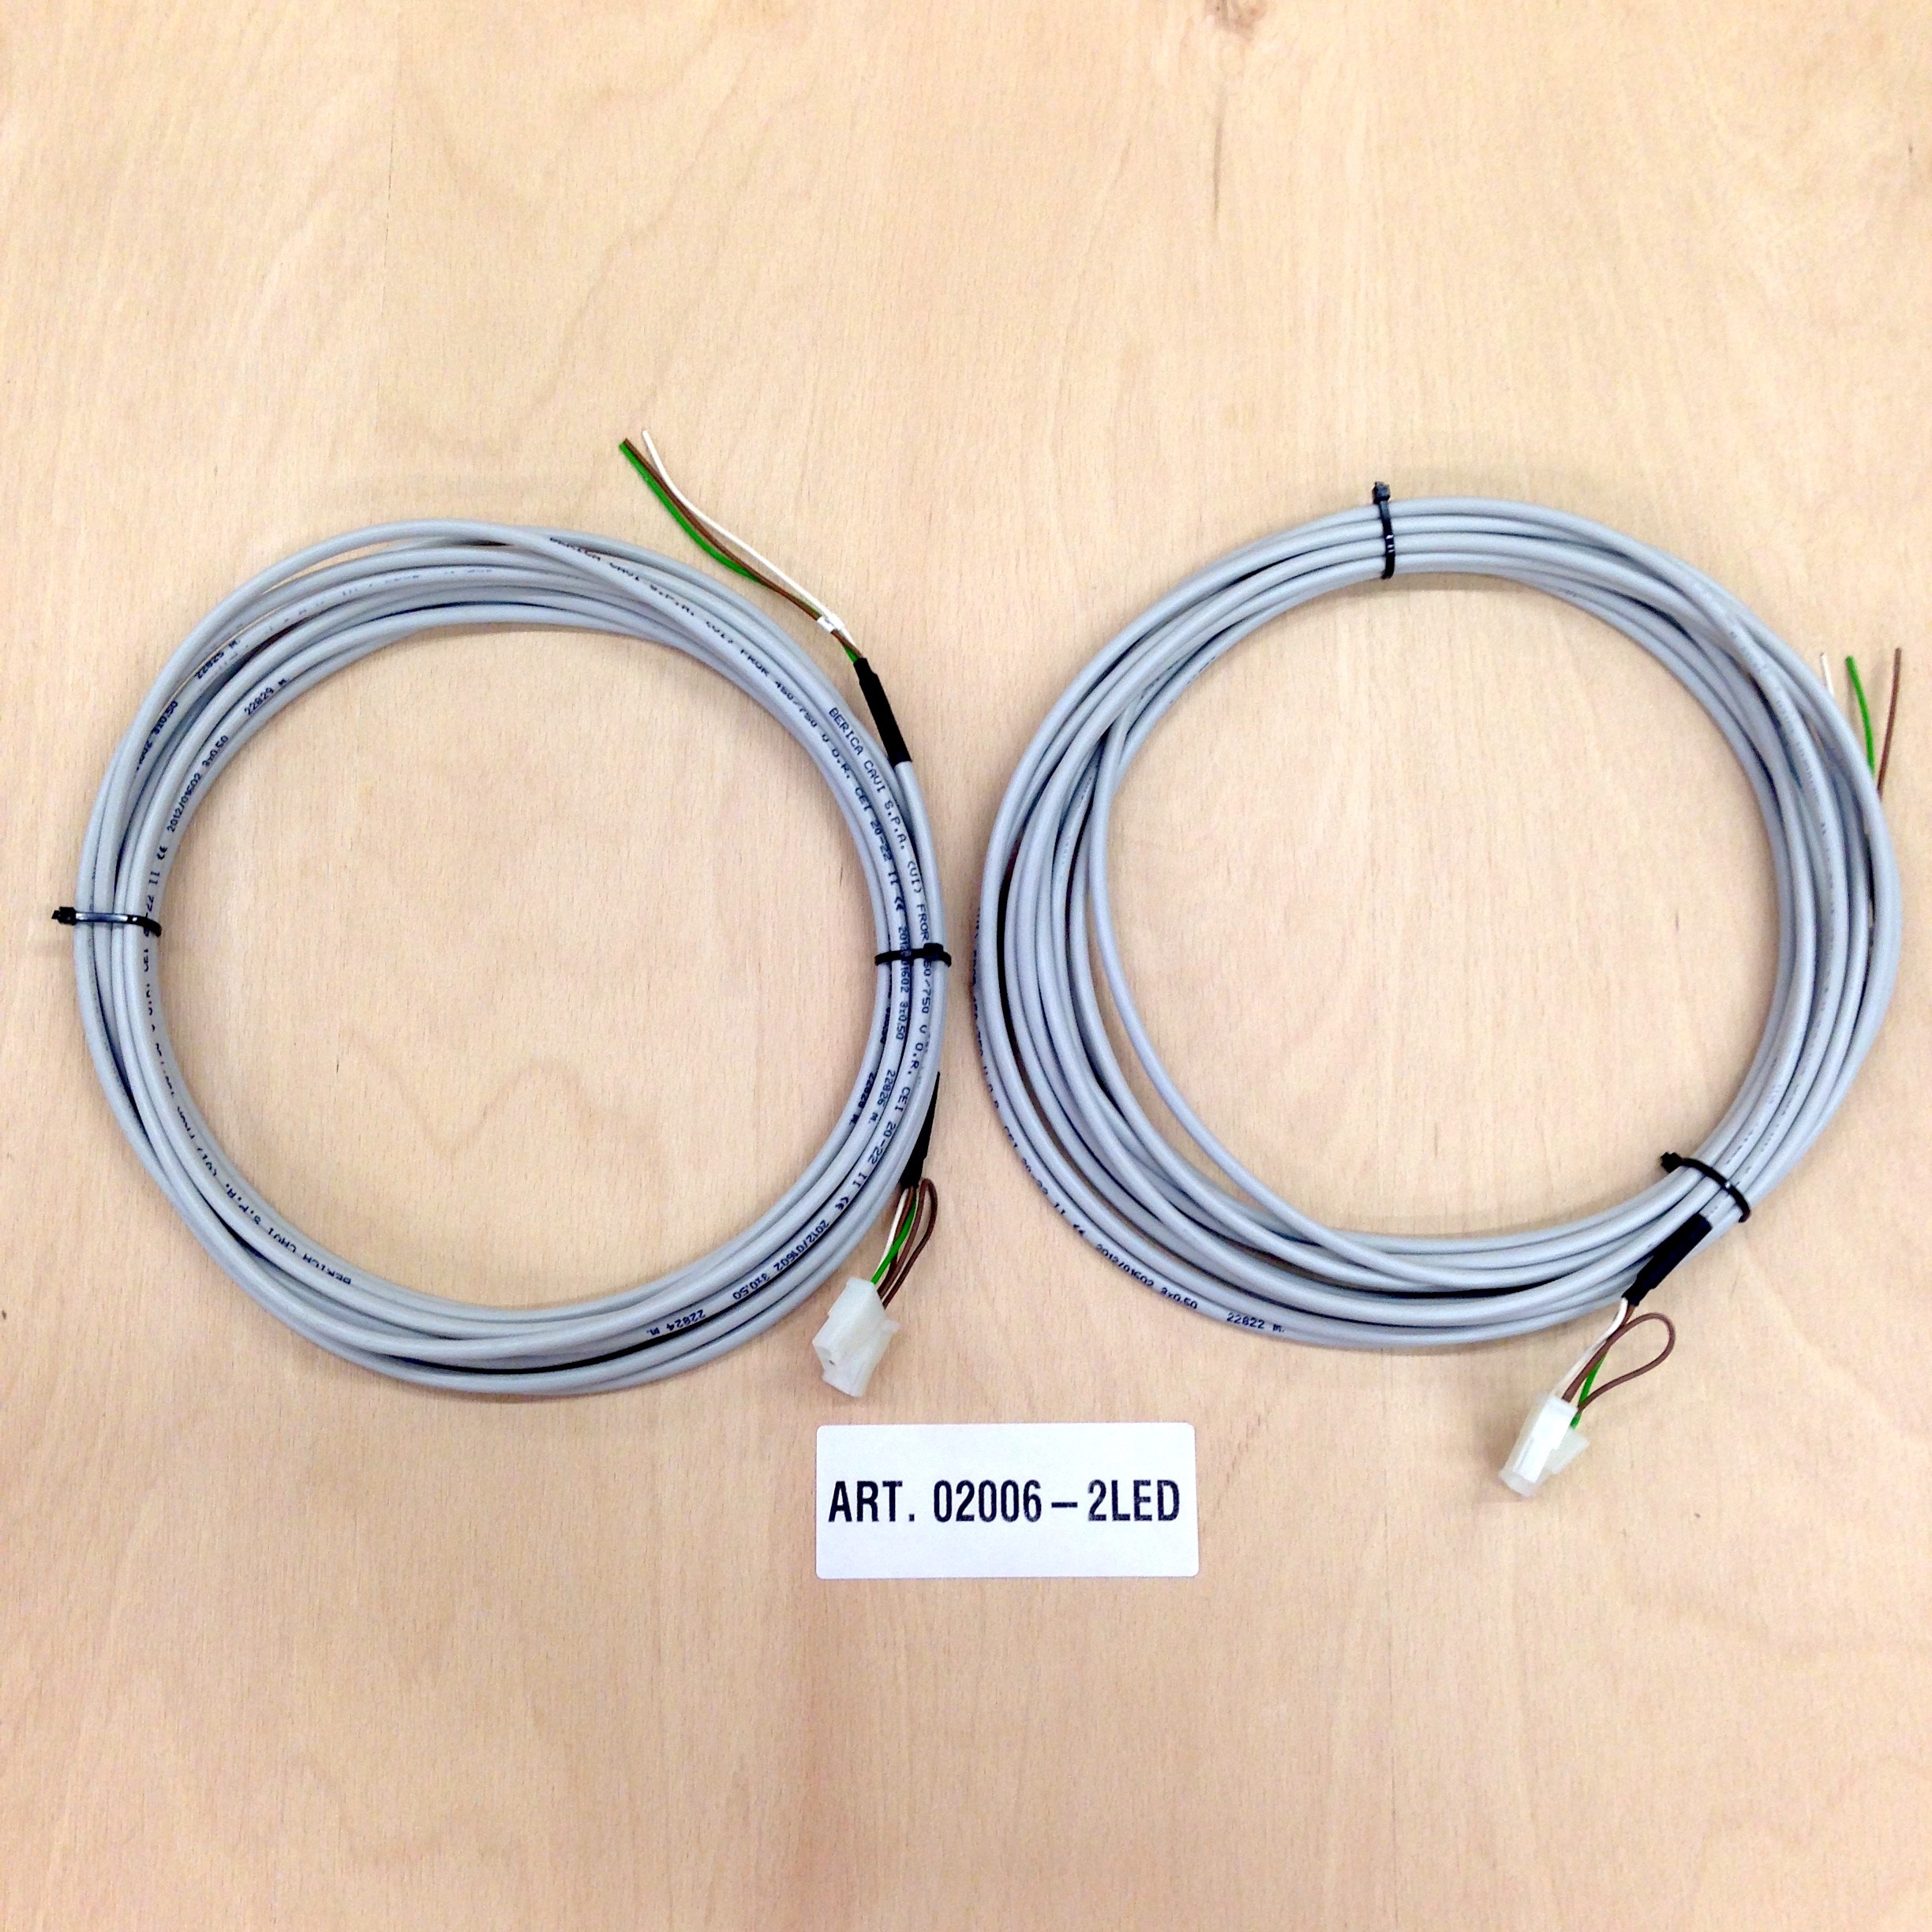 TWO-WAY LED LIGHT WIRING